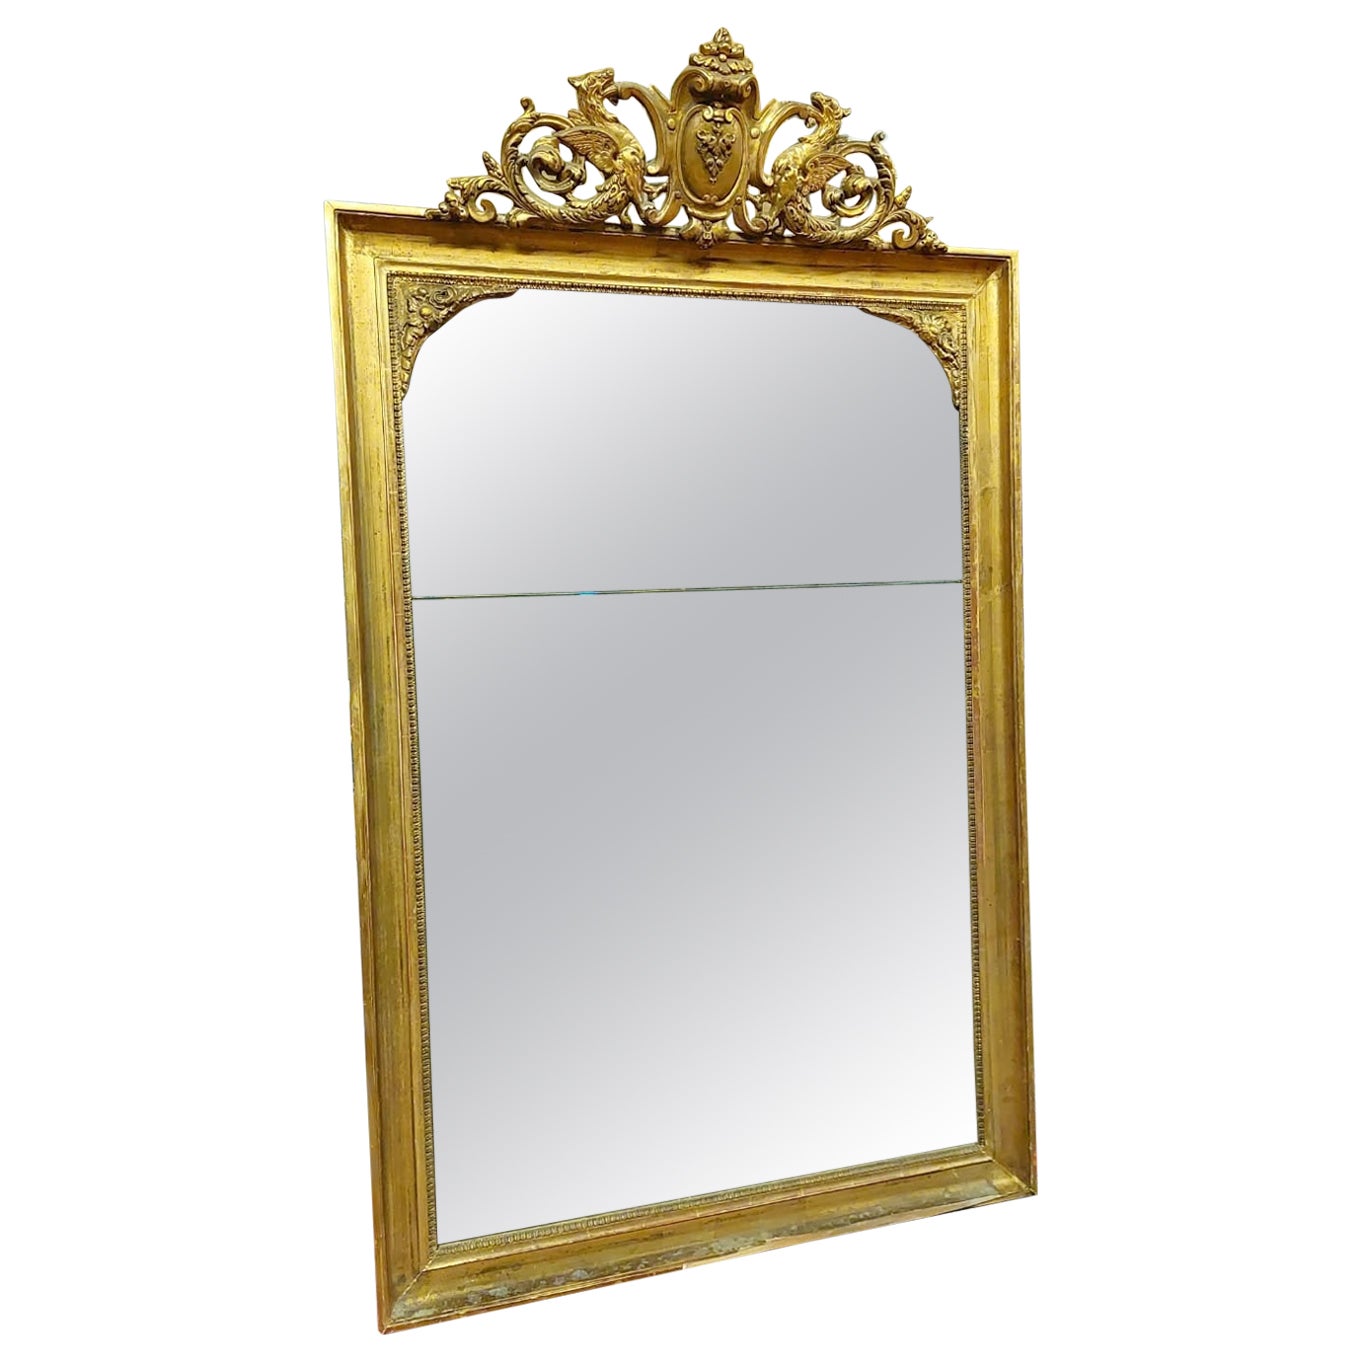 Antique Mirror in Gilded Wood with Carved Frame, Late 18th Century, France